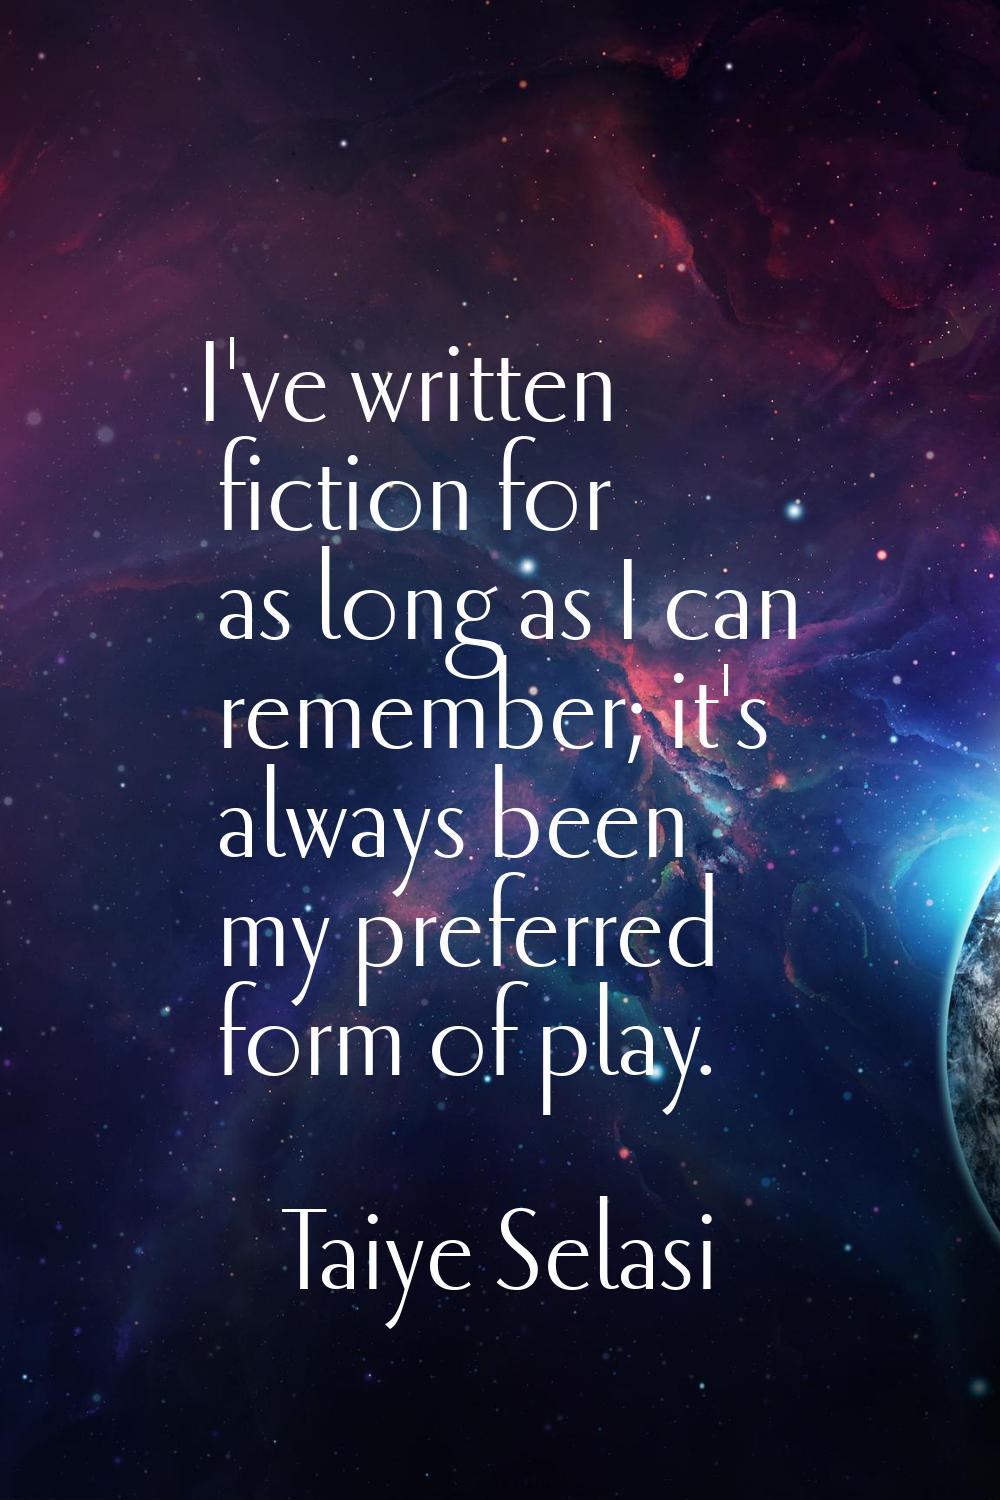 I've written fiction for as long as I can remember; it's always been my preferred form of play.